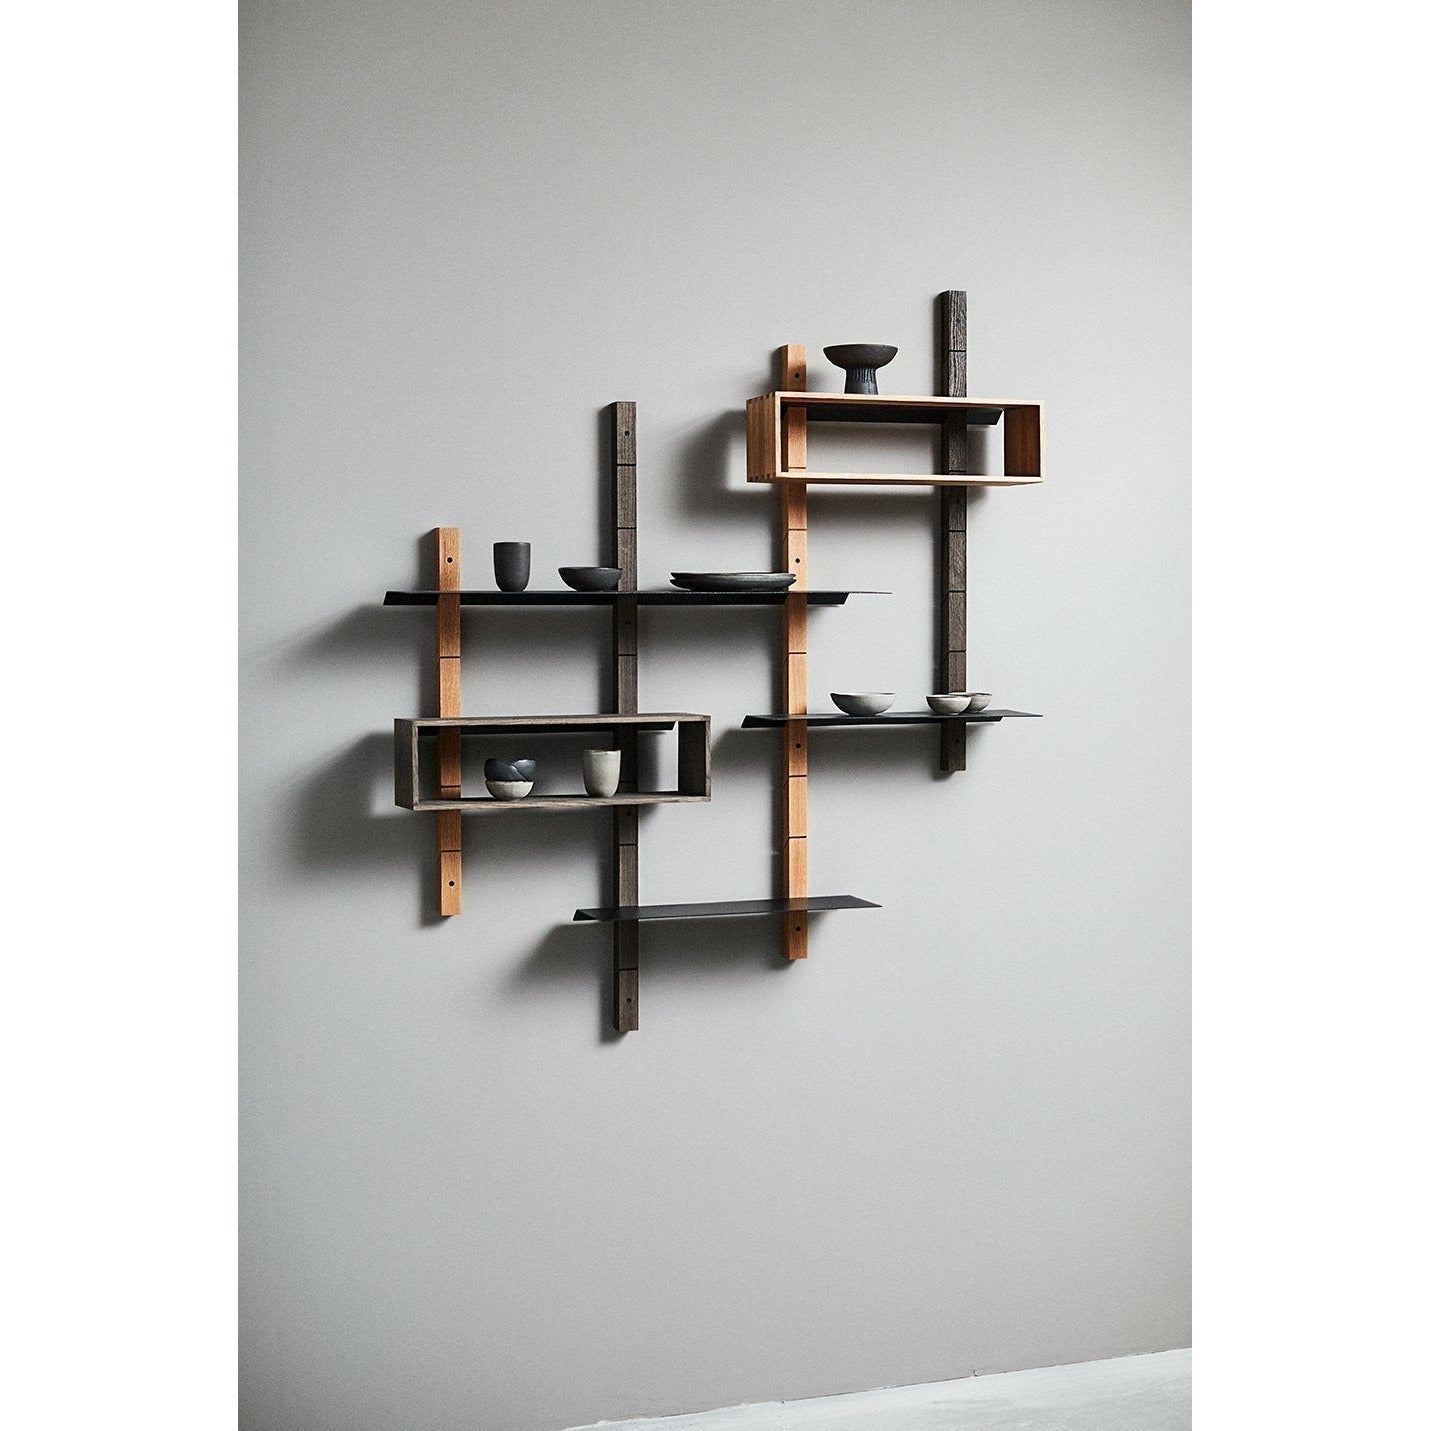 Muubs Oaks Shelving System Stained Oak, 120 cm